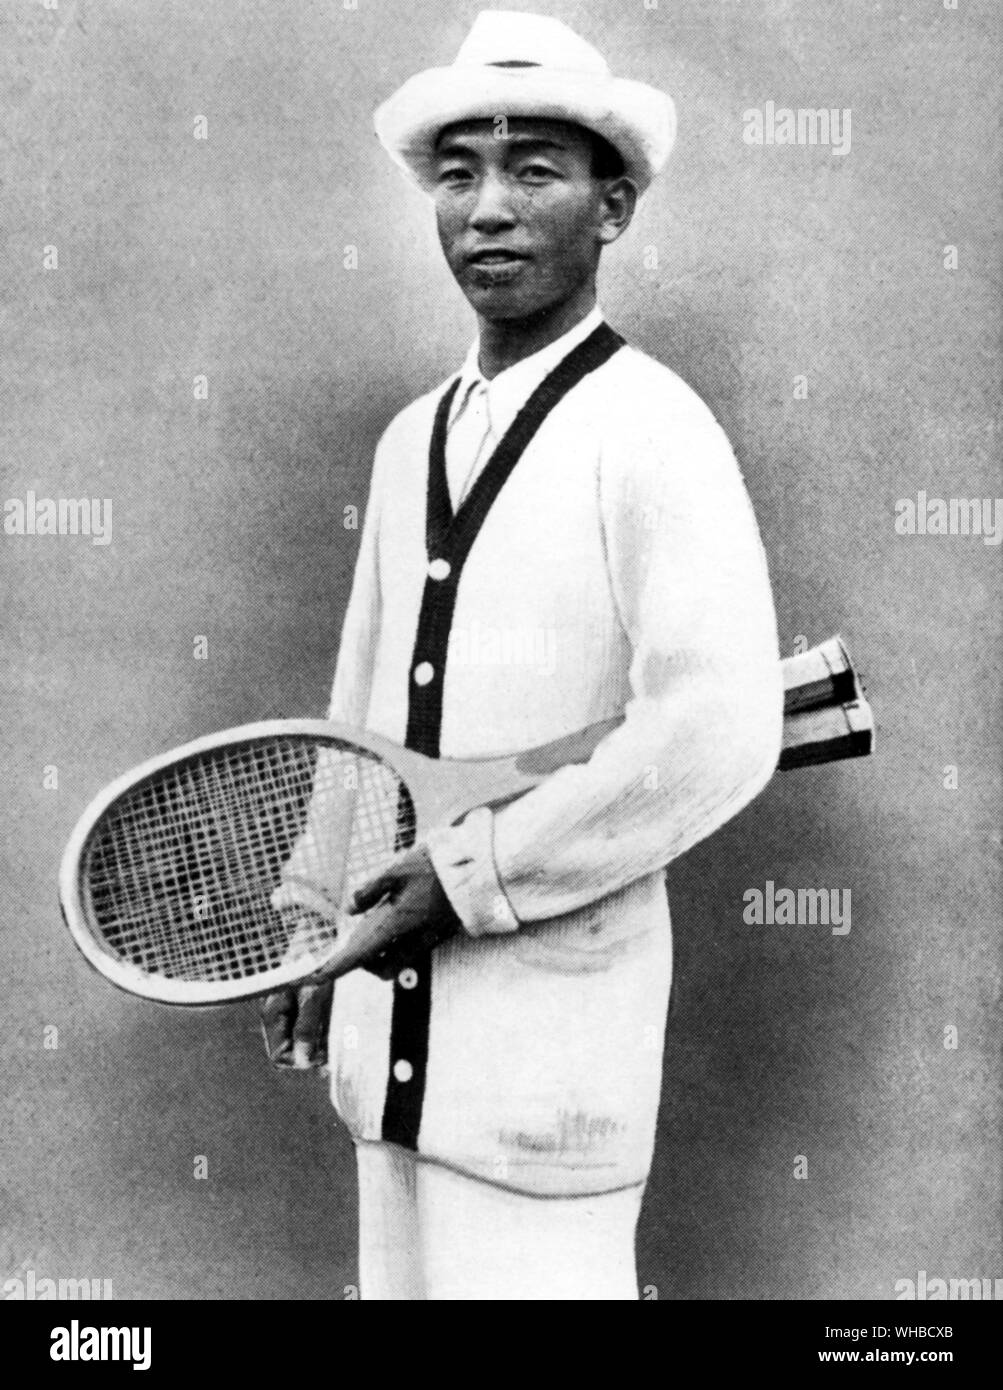 Z. Shimzu (Japan) 1921 Zenzo Shimizu (March 25, 1891 in Gunma Prefecture - April 12, 1977 in Osaka) was a tennis player from Japan. He reached the Challenge Round final of the Wimbledon Championships in 1920, where he lost to Bill Tilden 4-6, 4-6, 11-13. He also was a member of Japan's Davis Cup team that finished second to the Americans in 1921. He established the earliest period of Japanese tennis . Stock Photo